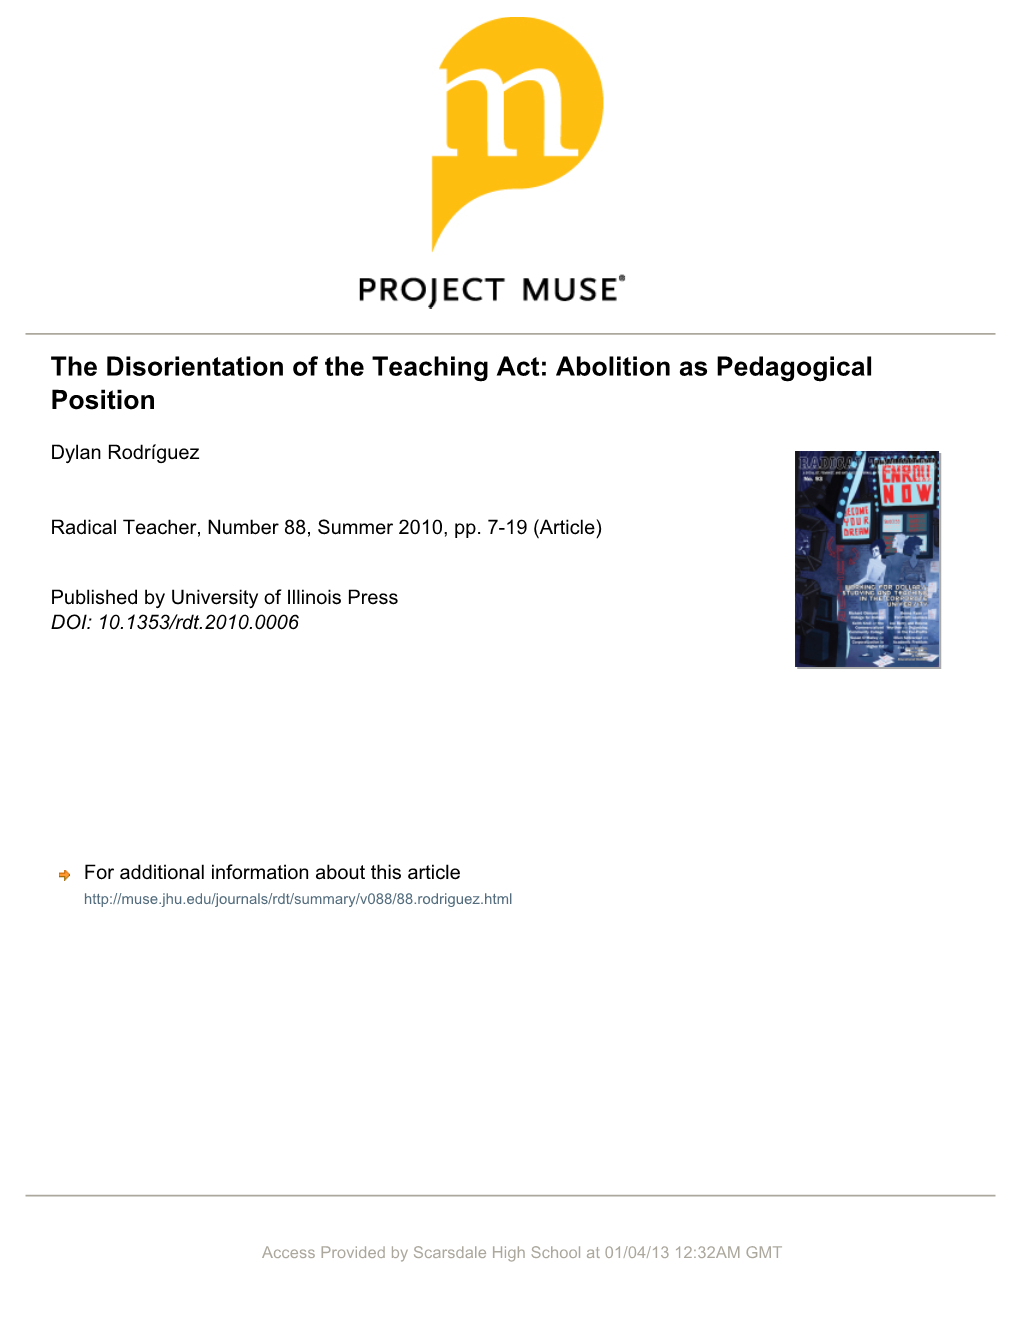 The Disorientation of the Teaching Act: Abolition As Pedagogical Position